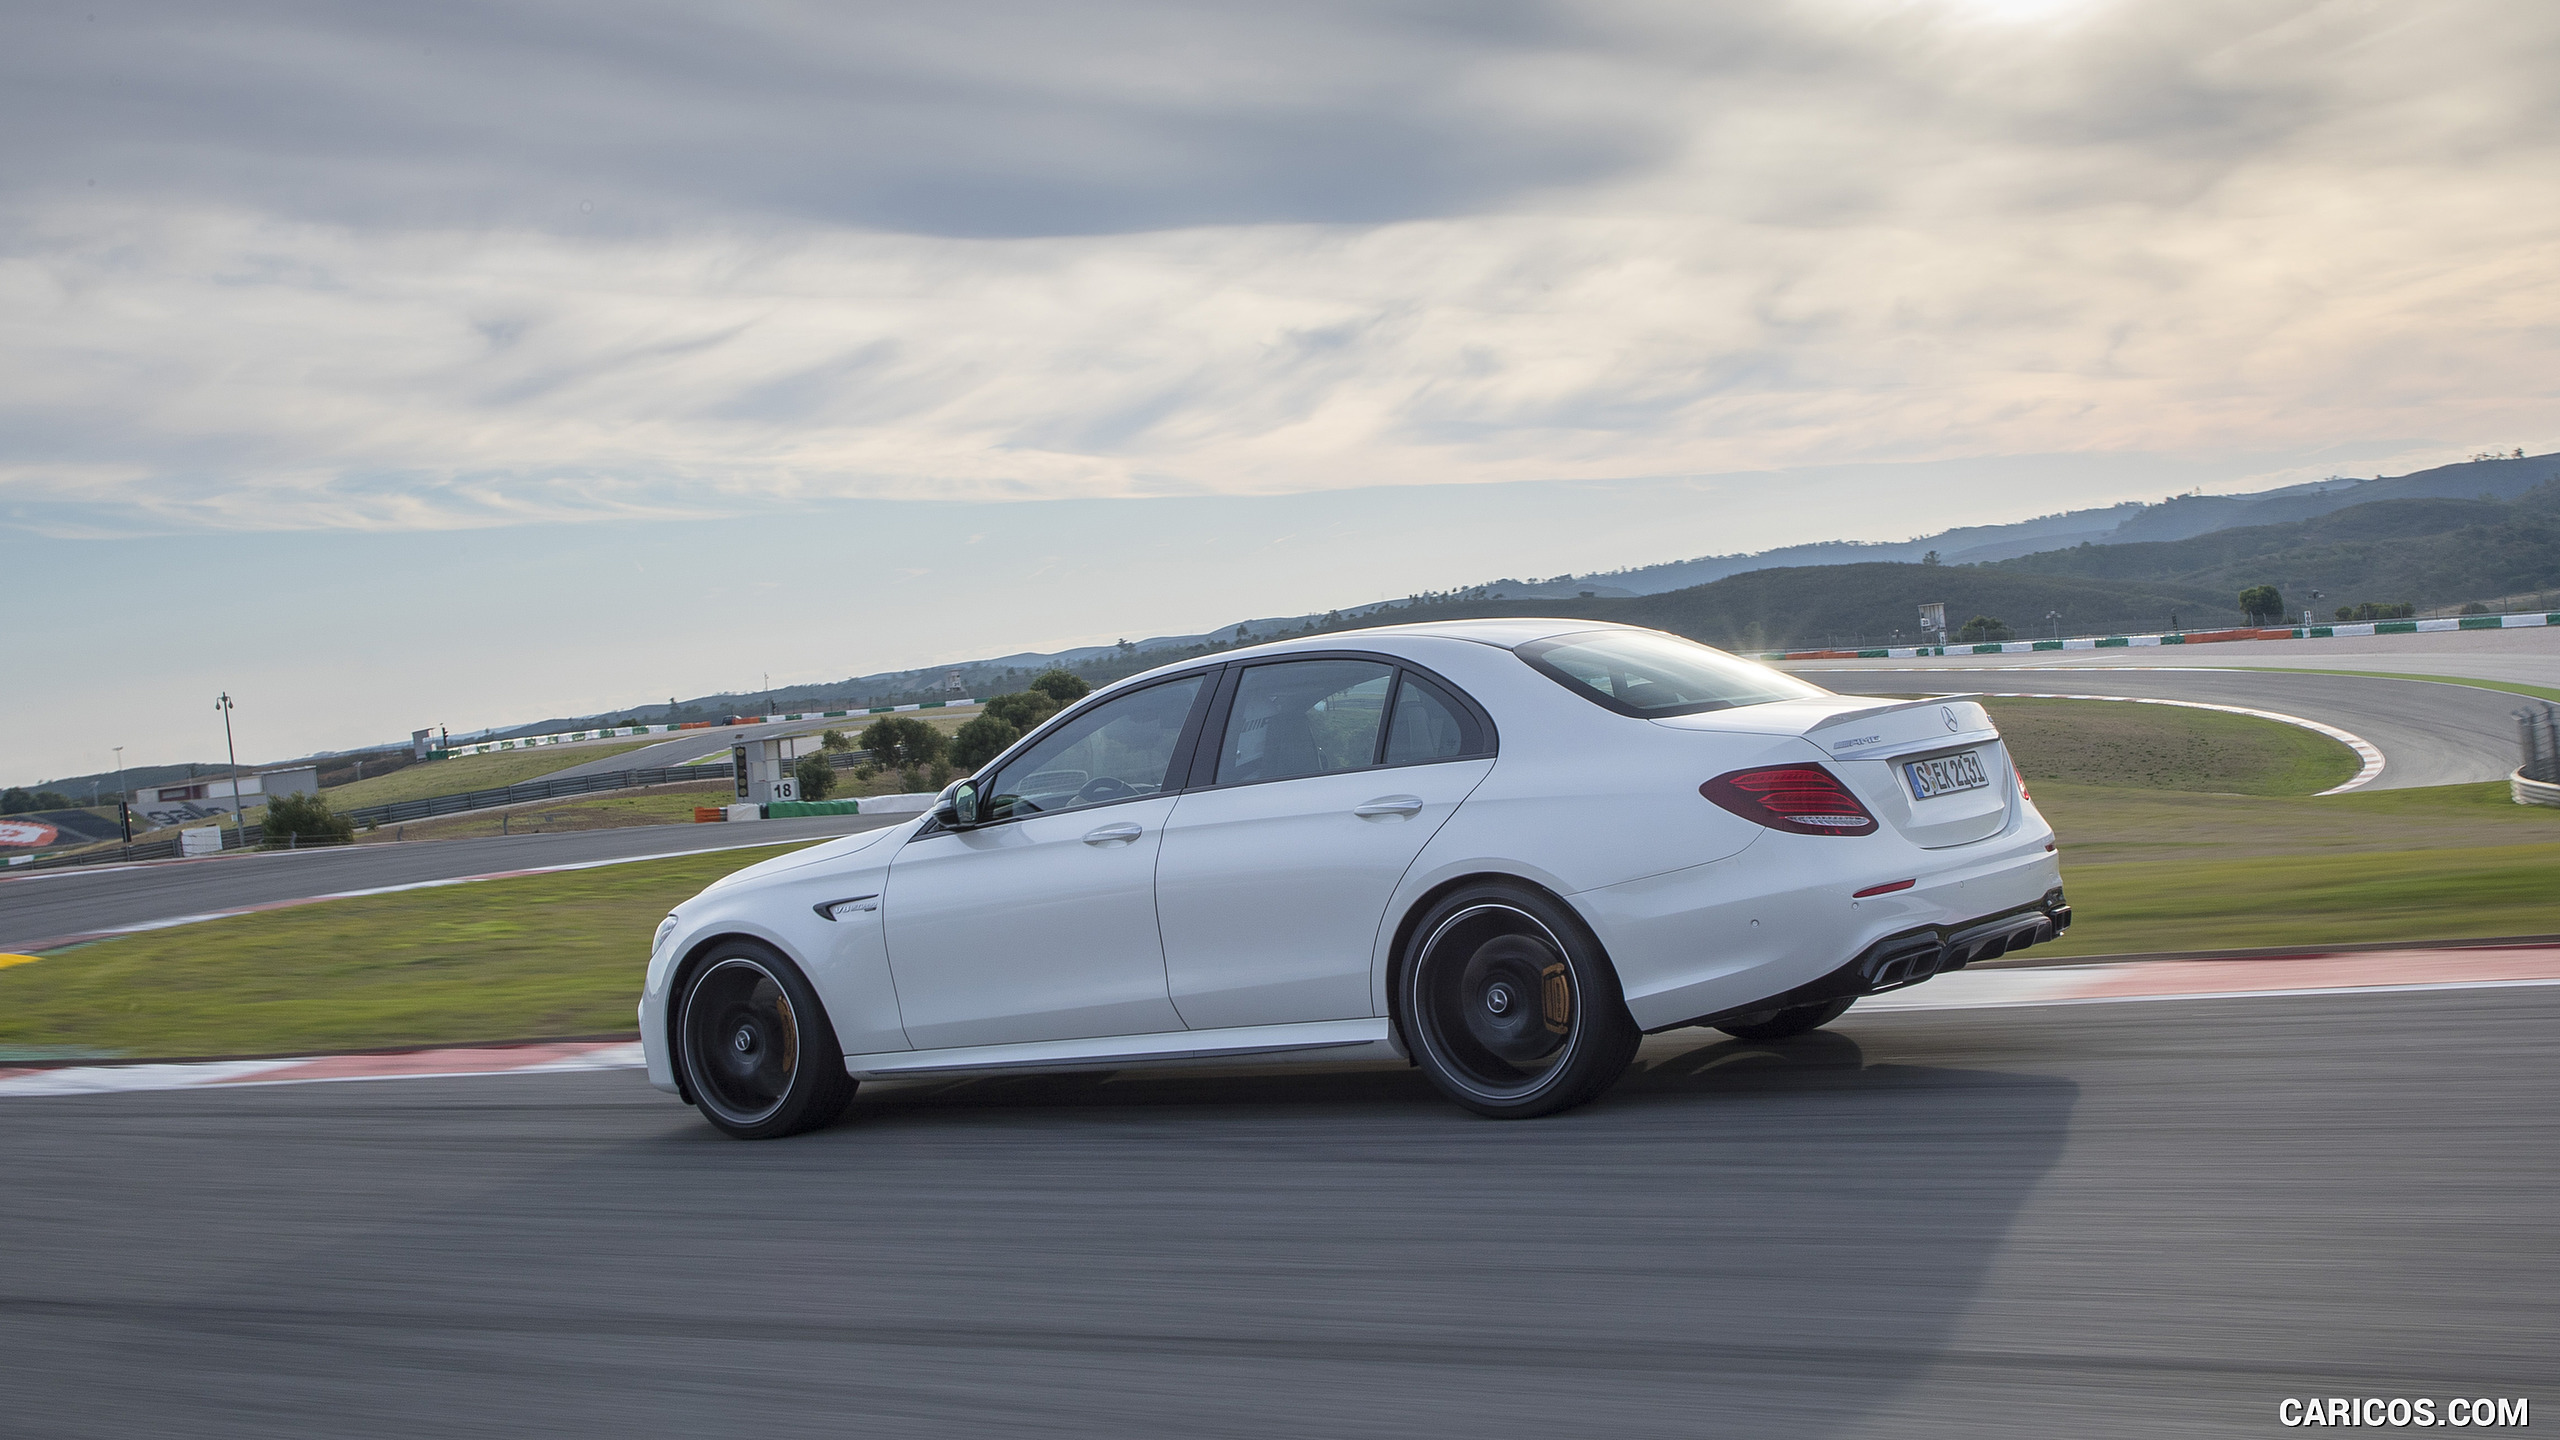 2018 Mercedes-AMG E63 S 4MATIC+ - Side, #117 of 323